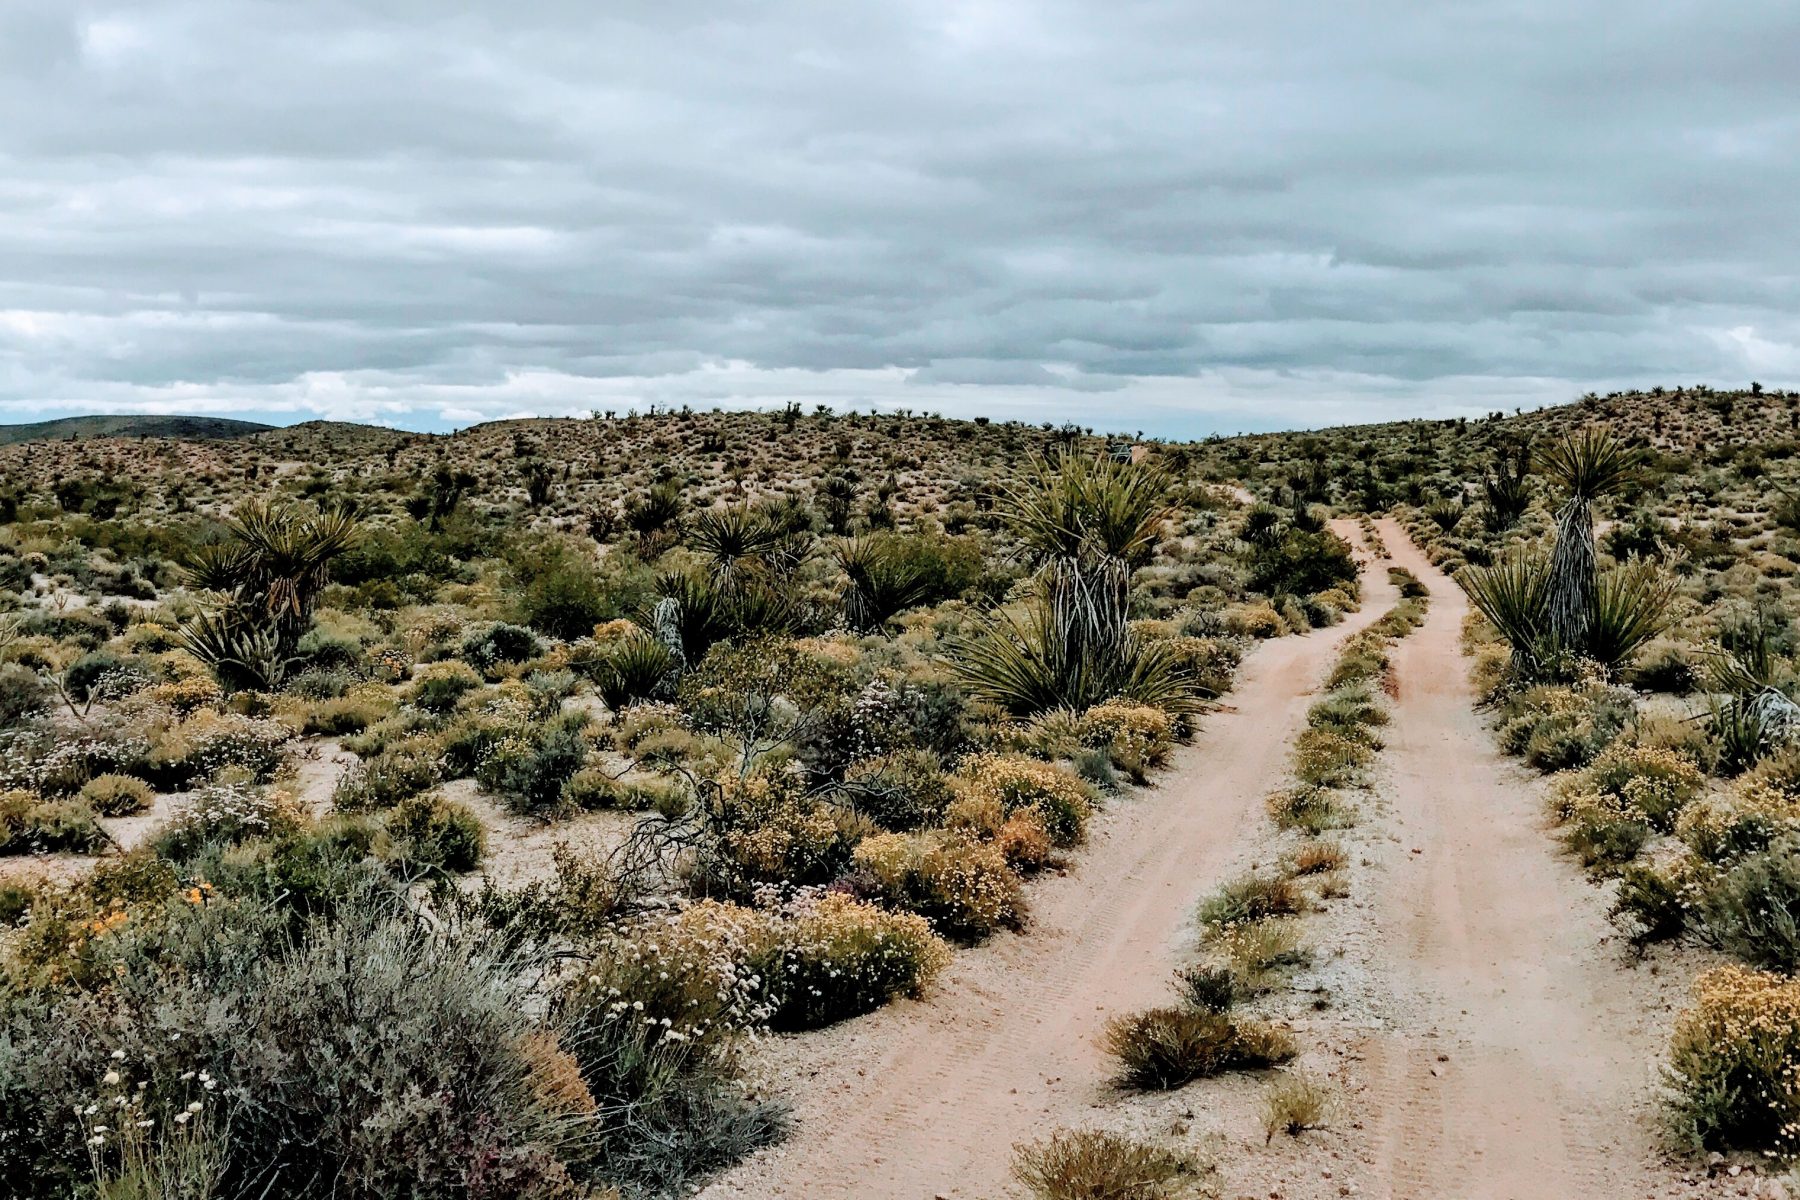 The Mojave Road